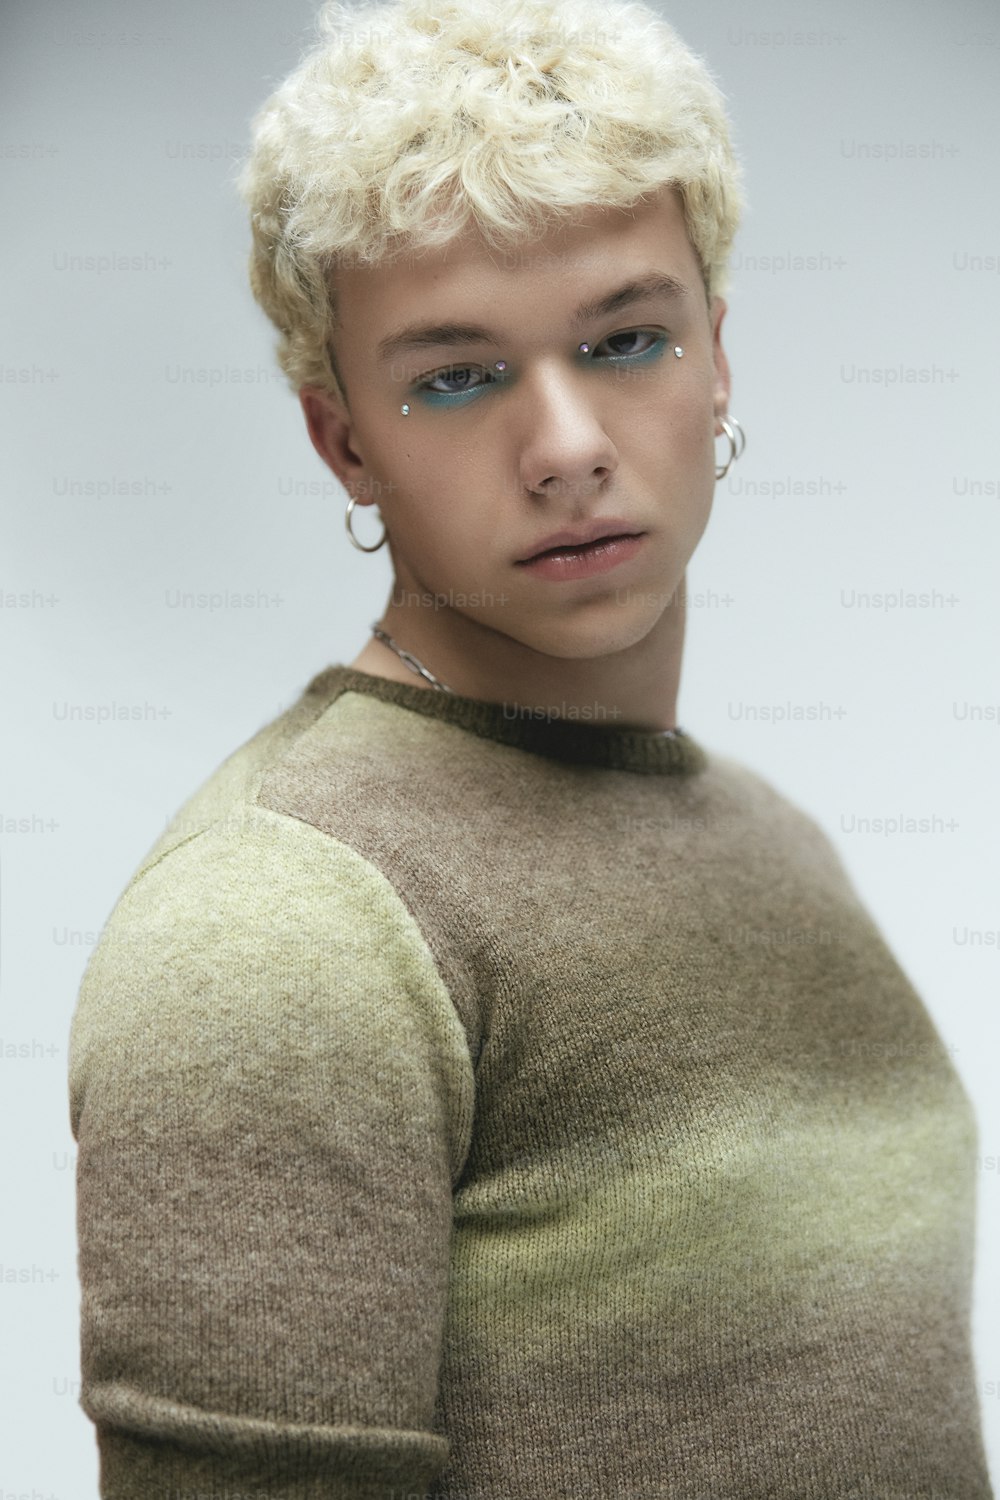 a young man with blonde hair wearing a sweater